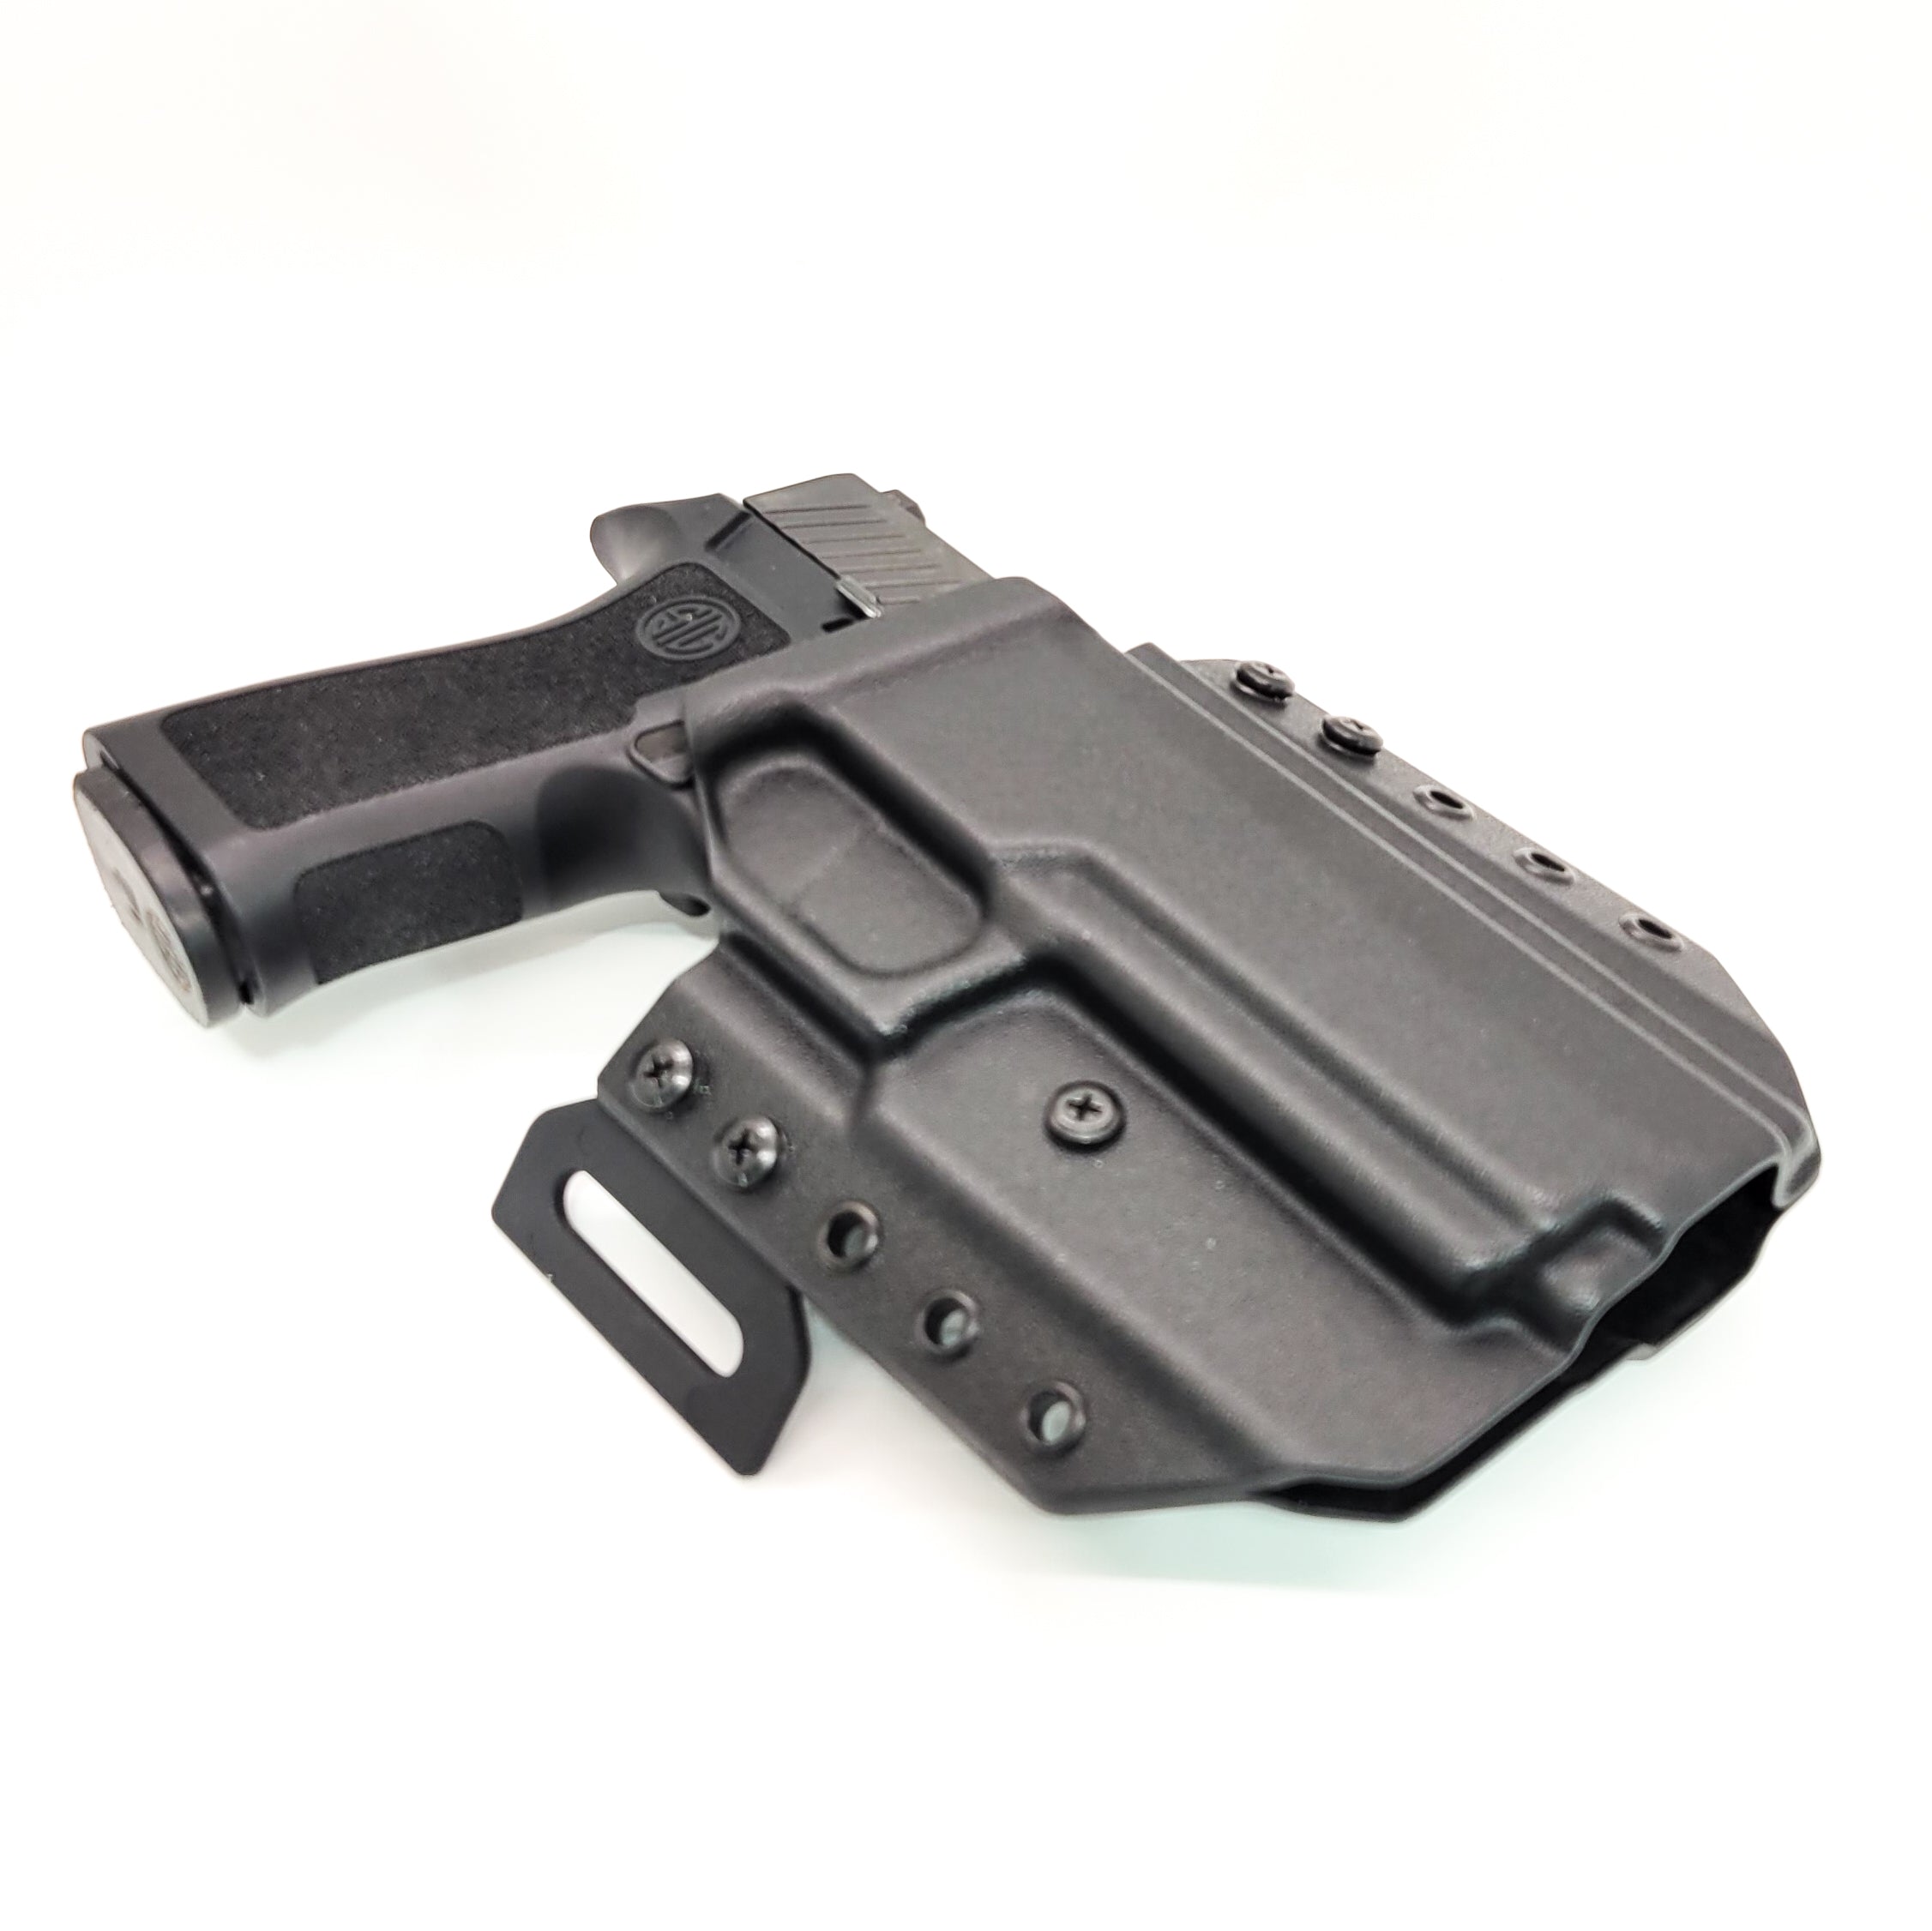 For the 2023 Best Outside Waistband Pancake Style Kydex holster designed to fit the Sig Sauer P320, shop Four Brothers Holsters  Full sweat guard, adjustable retention, open muzzle, cleared for a red dot sight. Made in the USA P320 Full Size, X5 X-FIVE, M17, M18, Carry, XCarry, XCompact, and Compact. Cant and Concealed